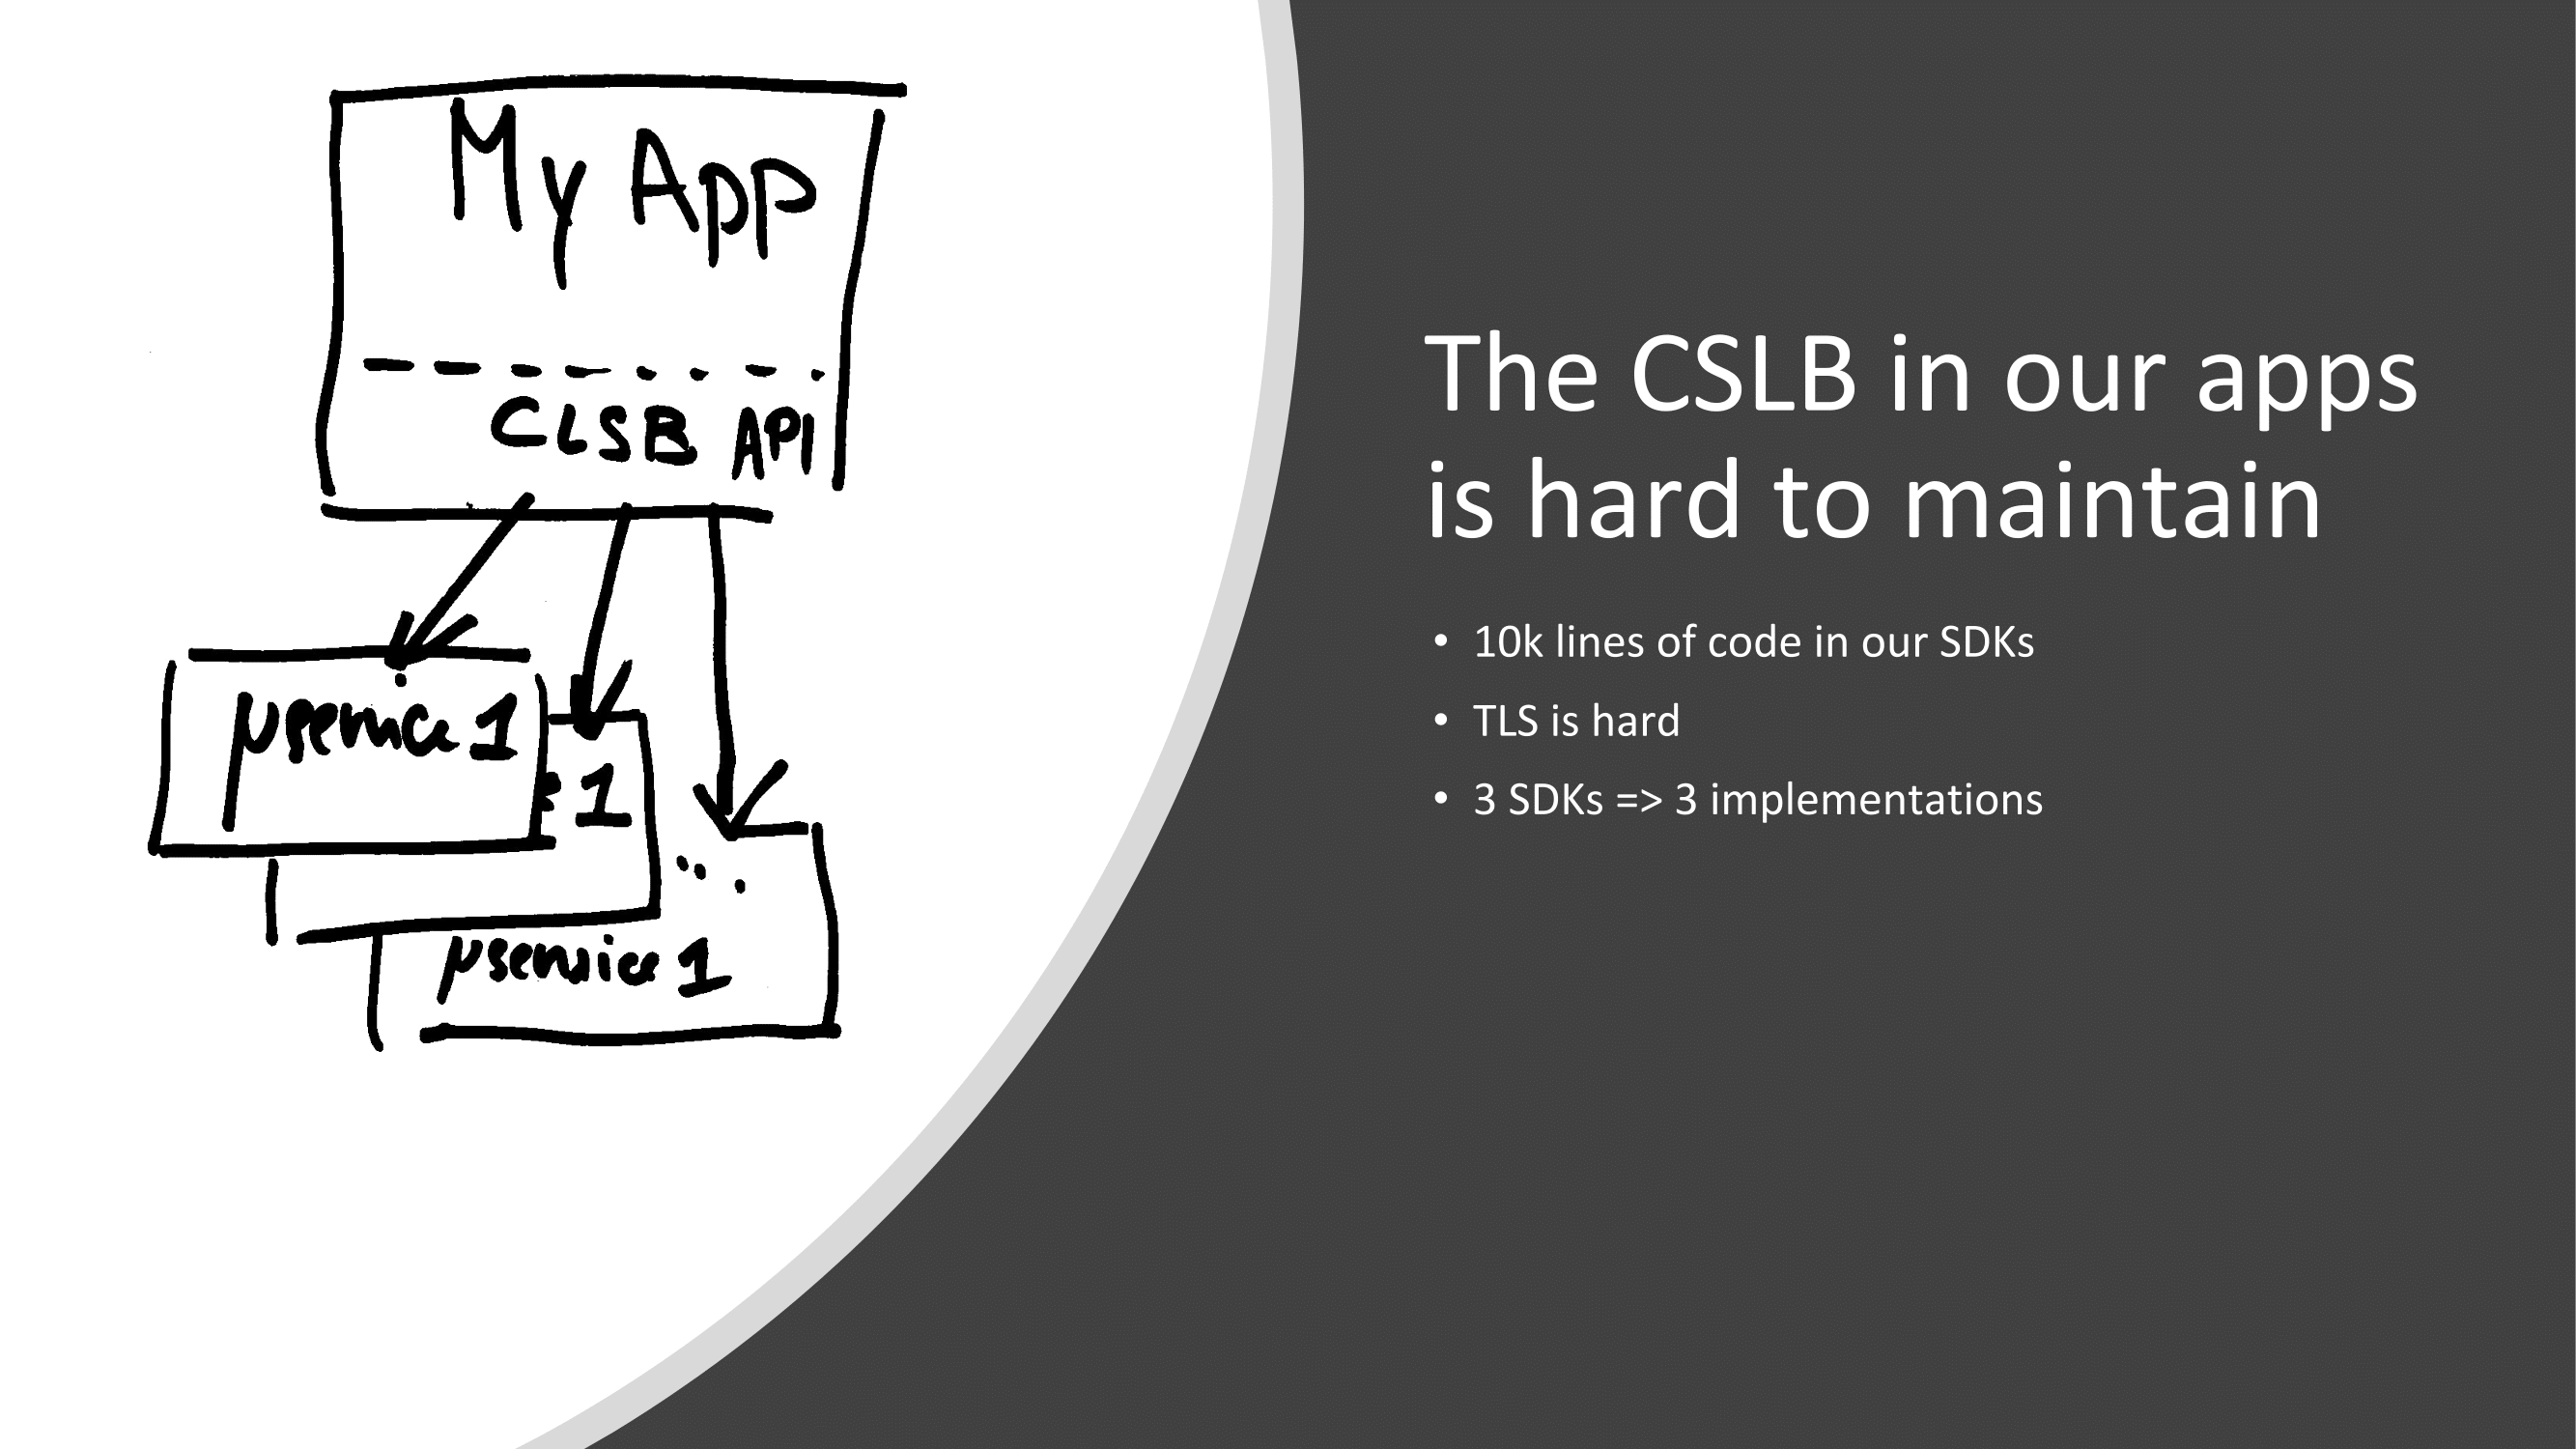 16.-cslb-was-hard-to-maintain